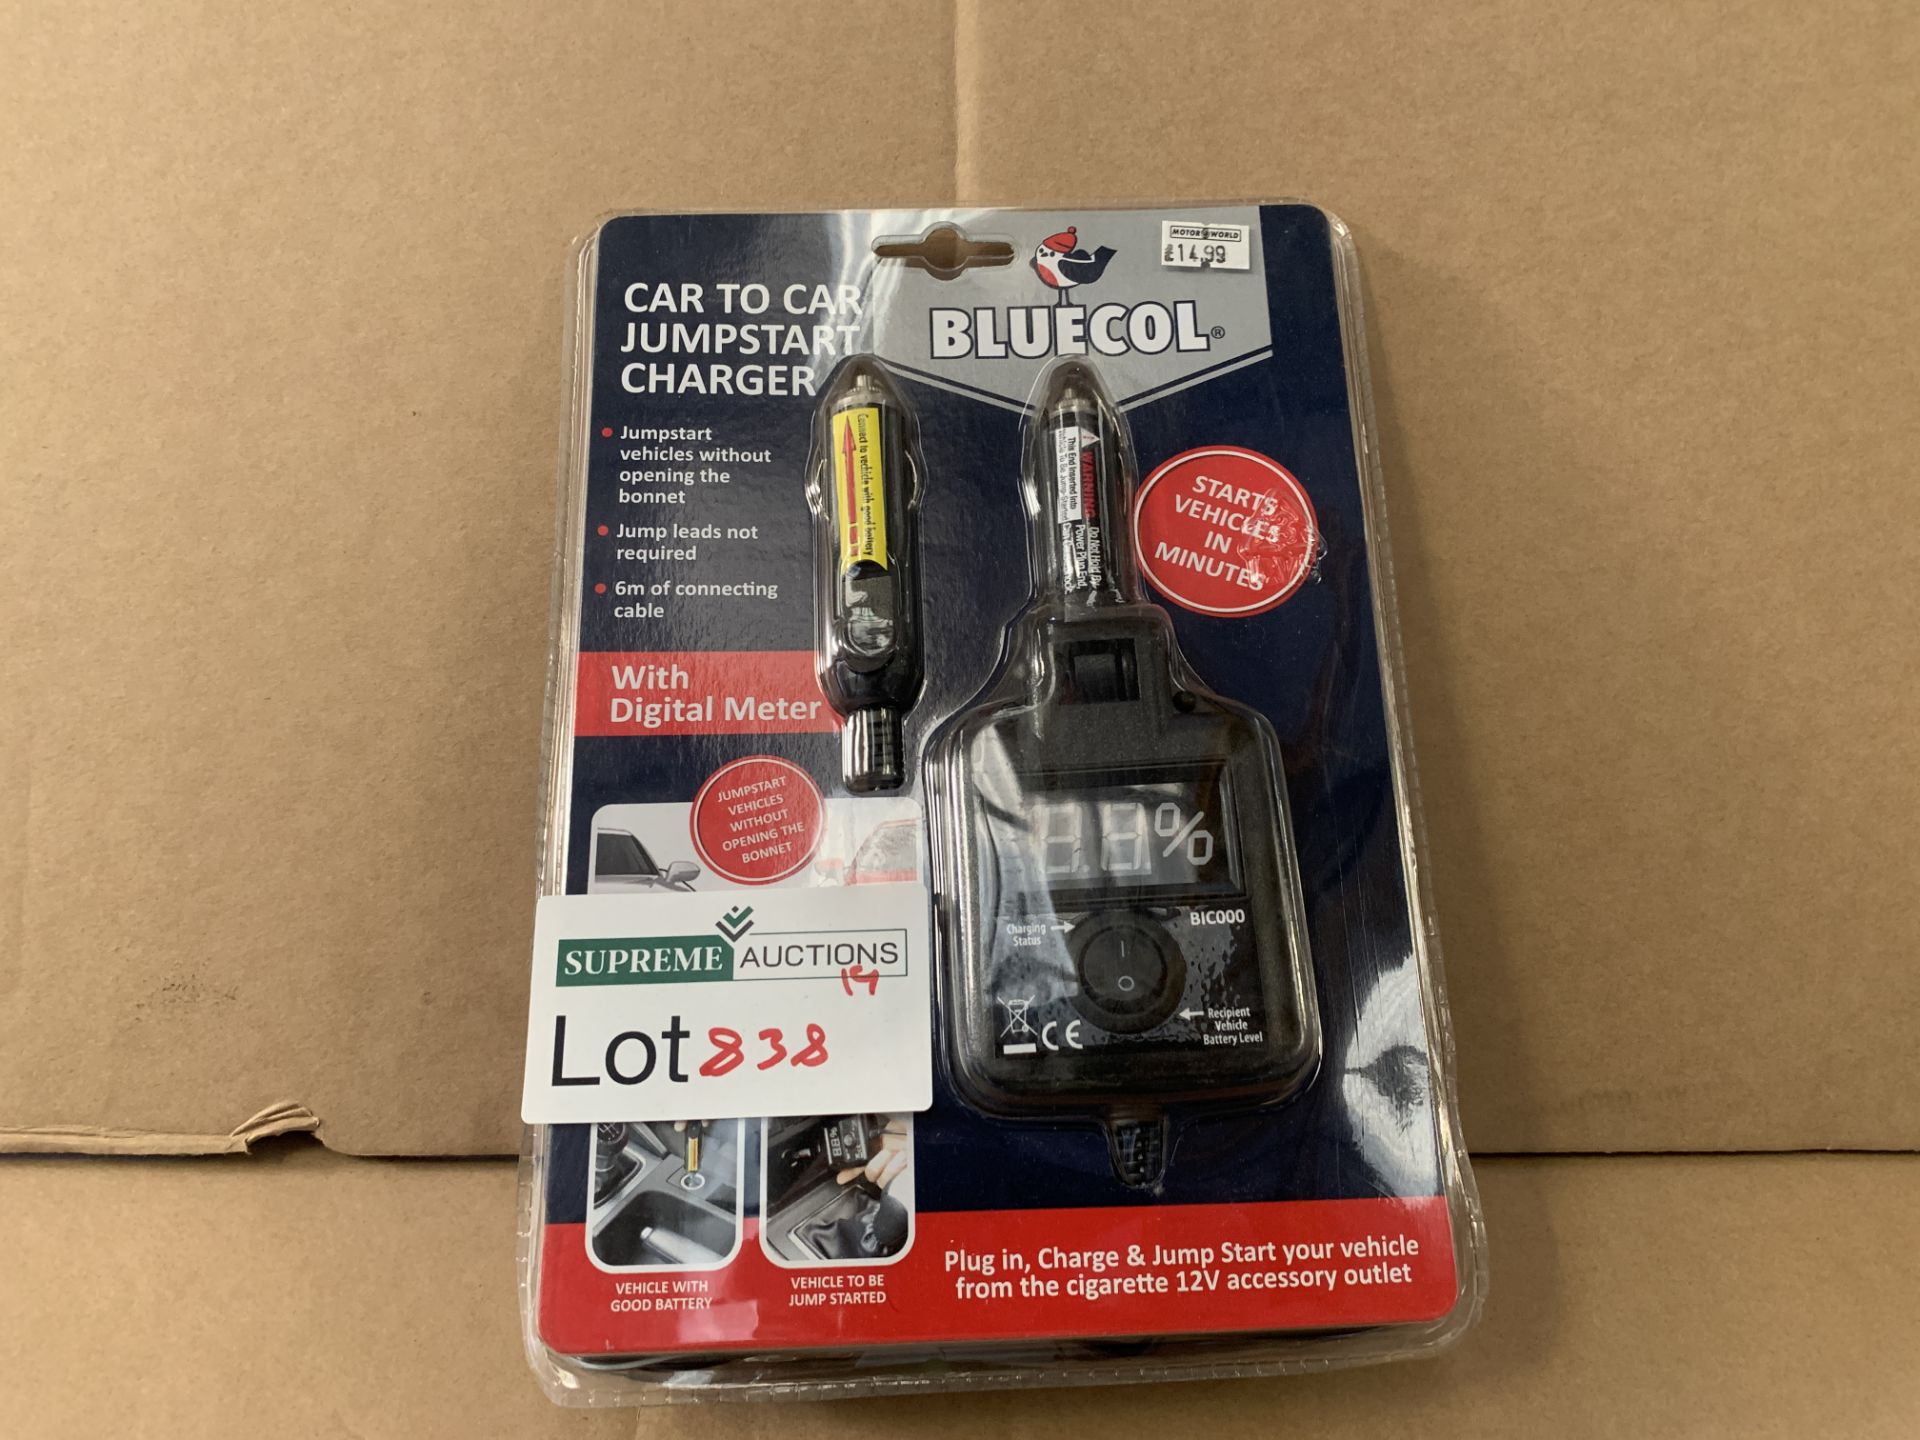 9 X BRAND NEW BLUECOL CAR TO CAR JUMPSTART CHARGERS S1